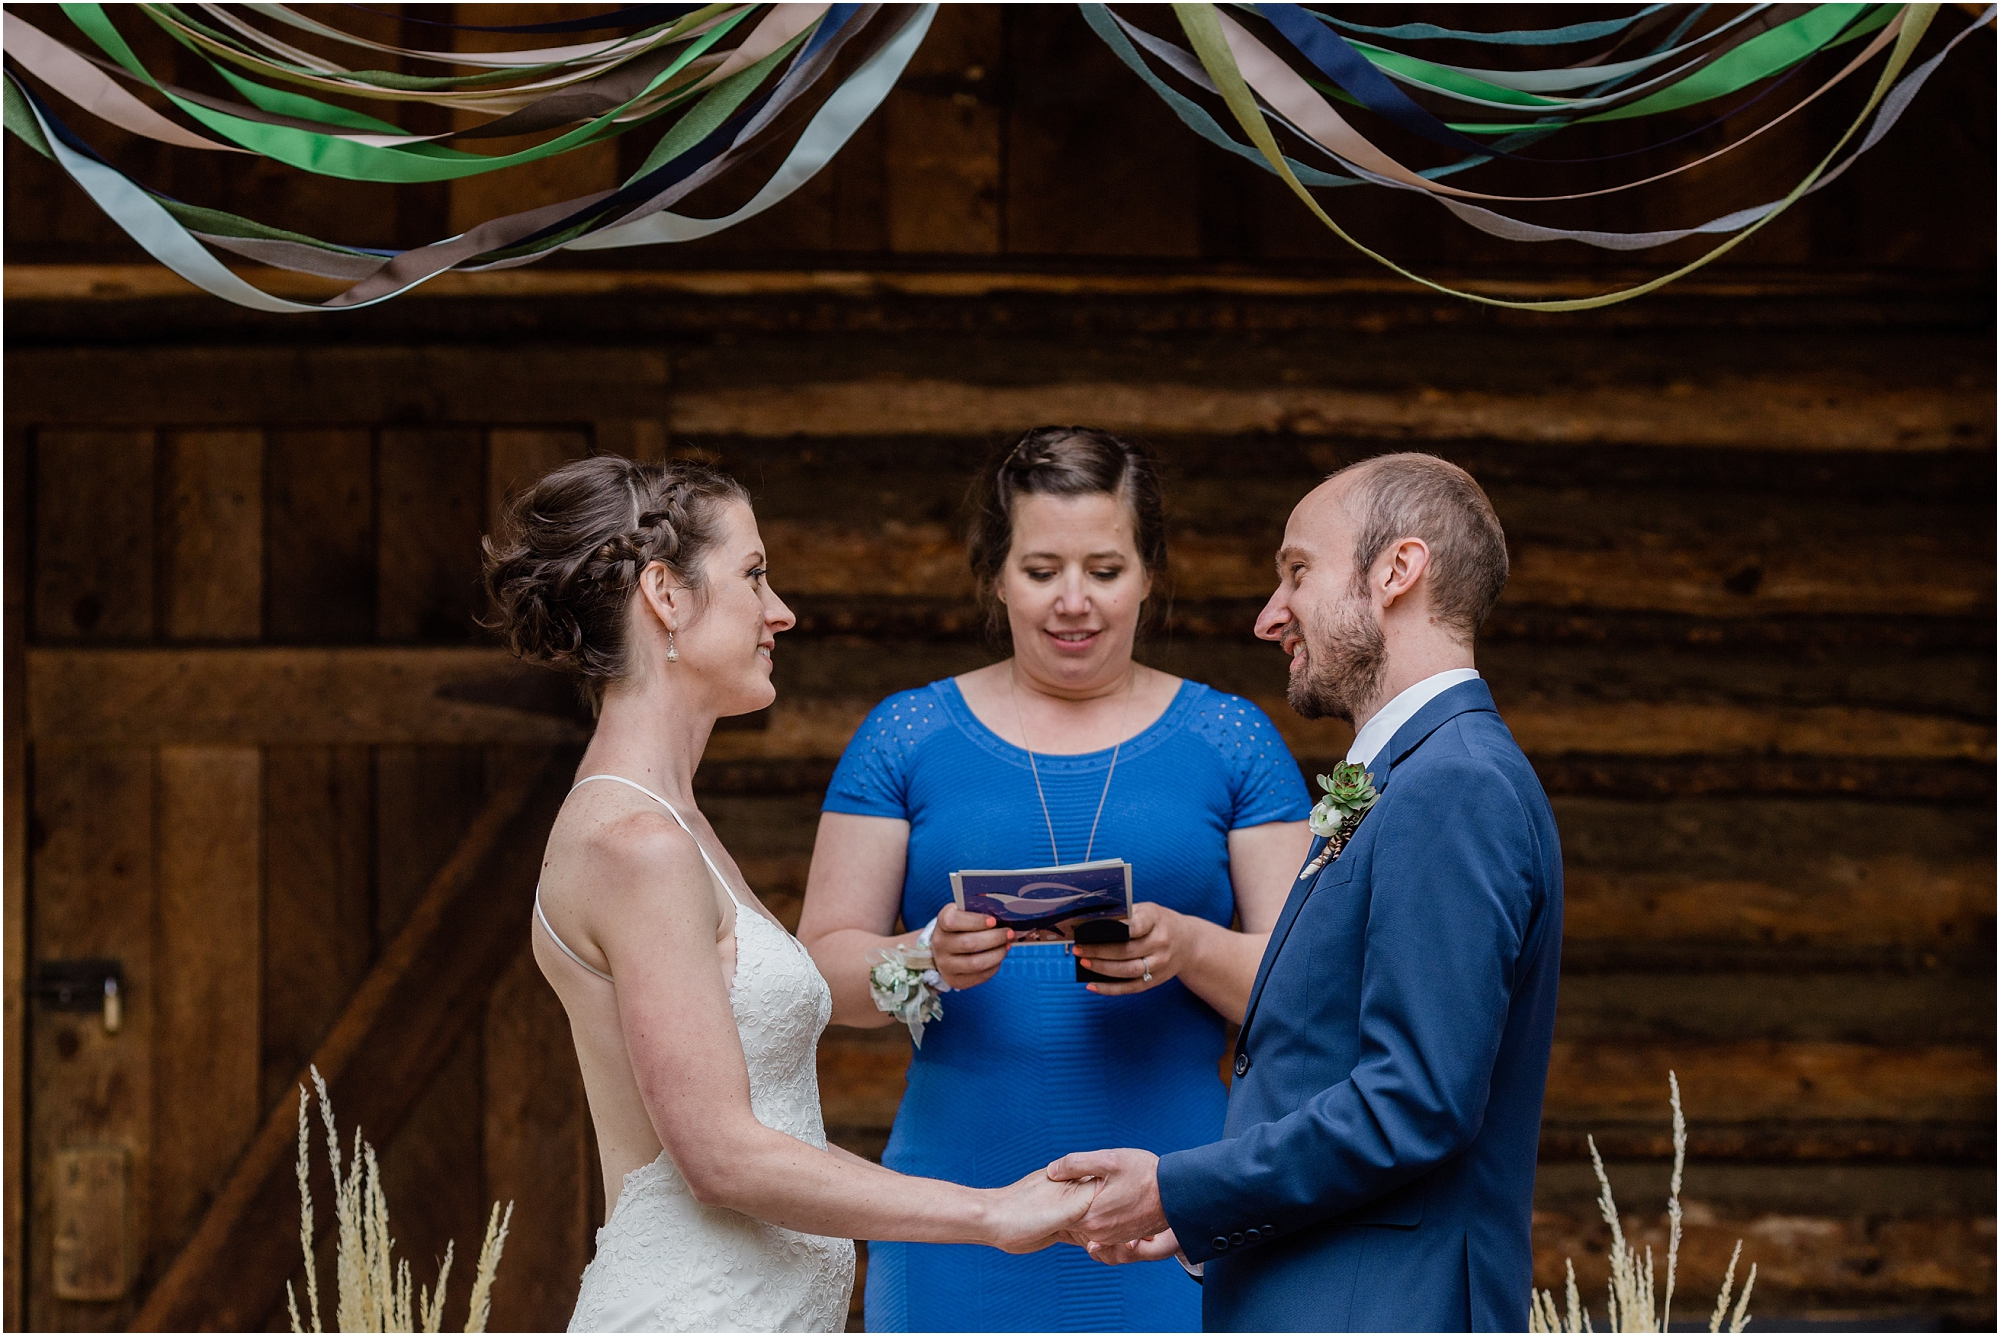 A close up image of the bride and groom as they say their wedding vows on the porch of the rustic cabin at the High Desert Museum in Bend, OR. | Erica Swantek Photography